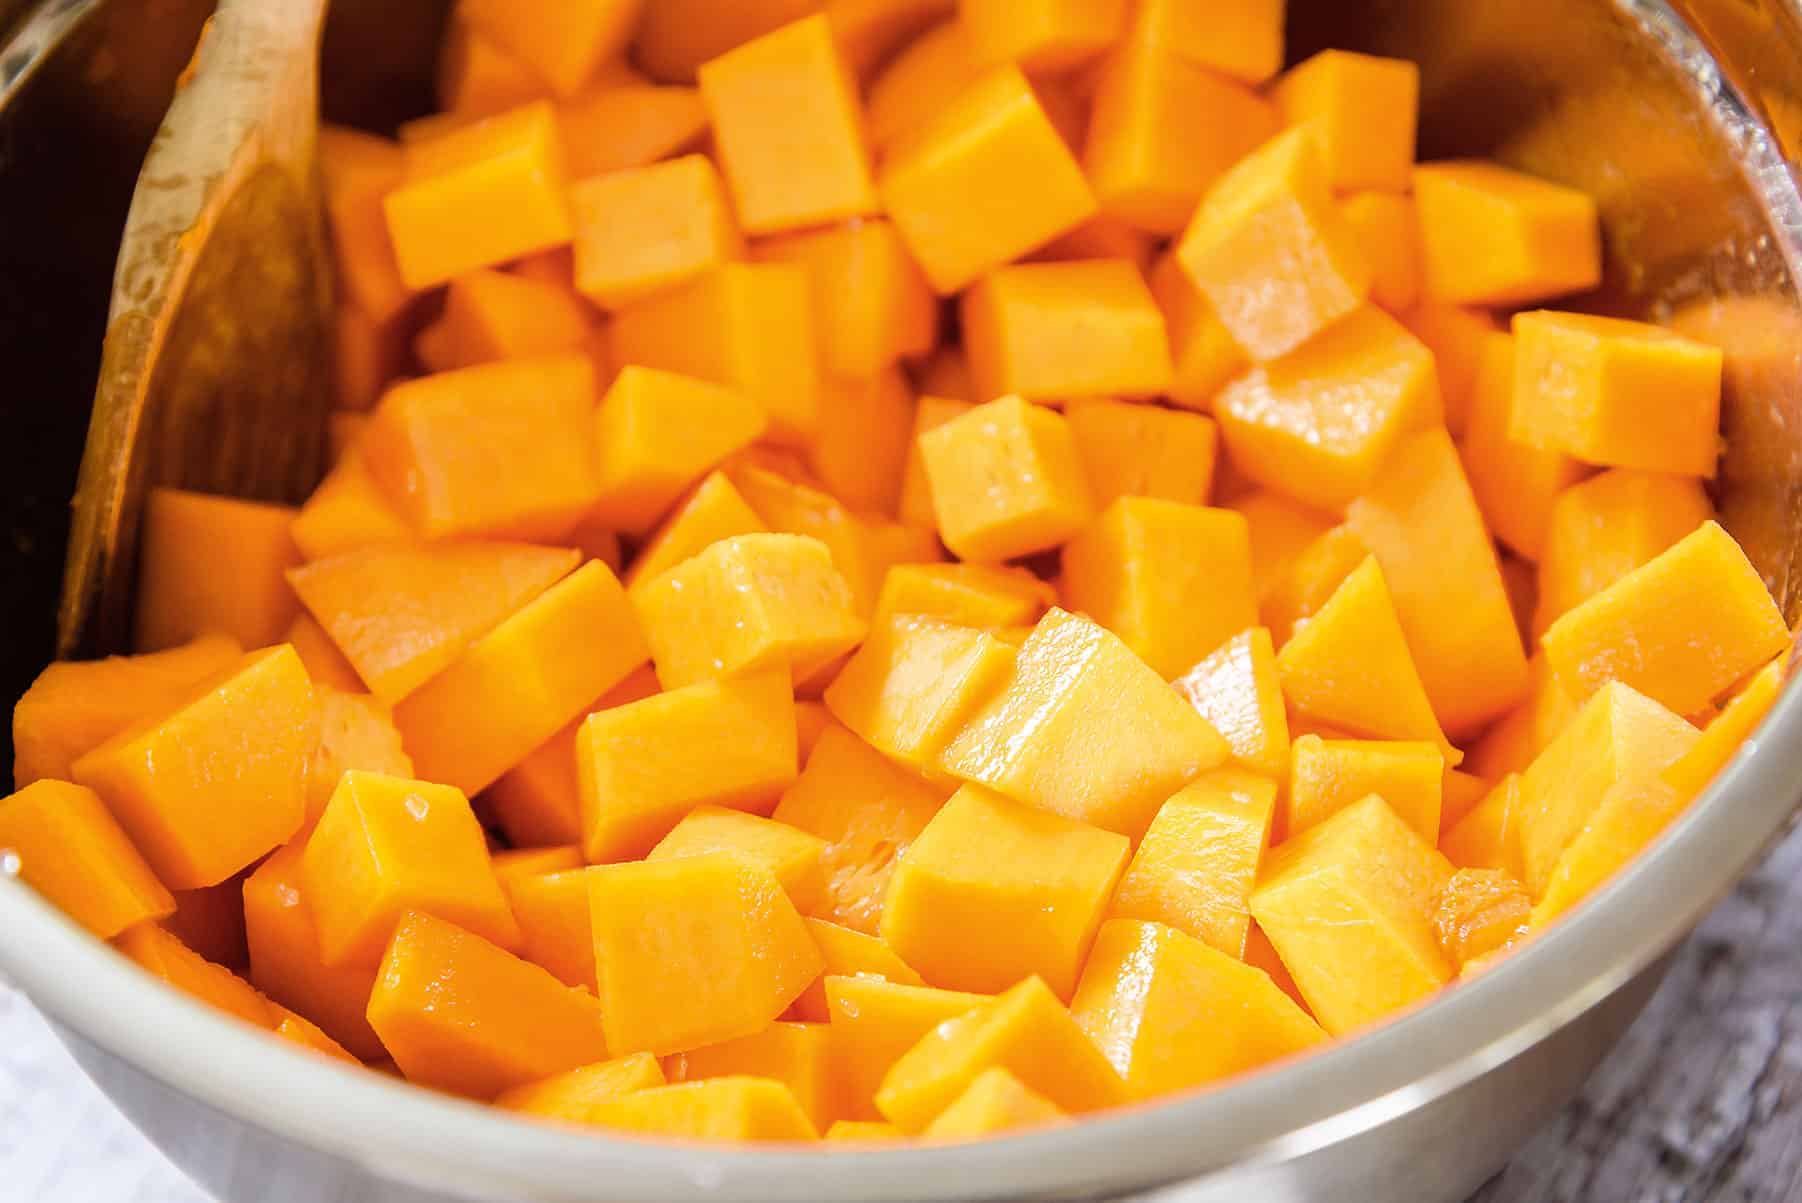 Adding diced butternut squash to melted butter